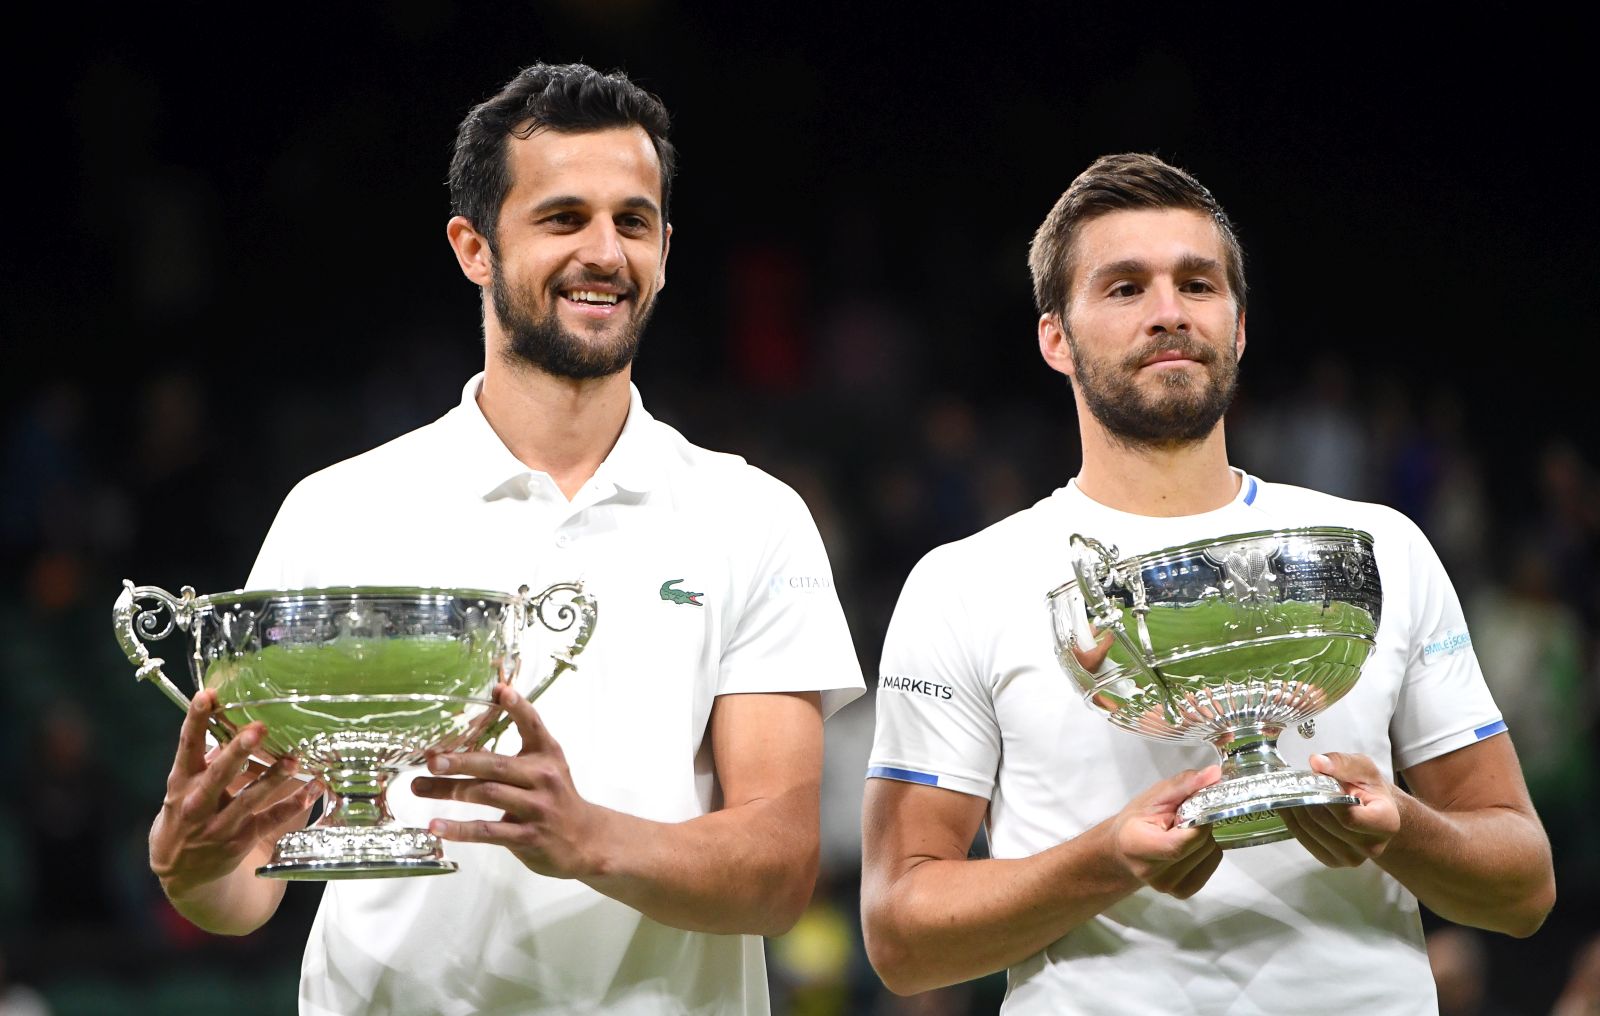 epa09336394 Croatian players Mate Pavic (L) and Nikola Mektic (R) pose with their trophies after winning their men's doubles final against Marcel Granollers of Spain and Horacio Zeballos of Argentina at the Wimbledon Championships in Wimbledon, Britain, 10 July 2021.  EPA/NEIL HALL   EDITORIAL USE ONLY